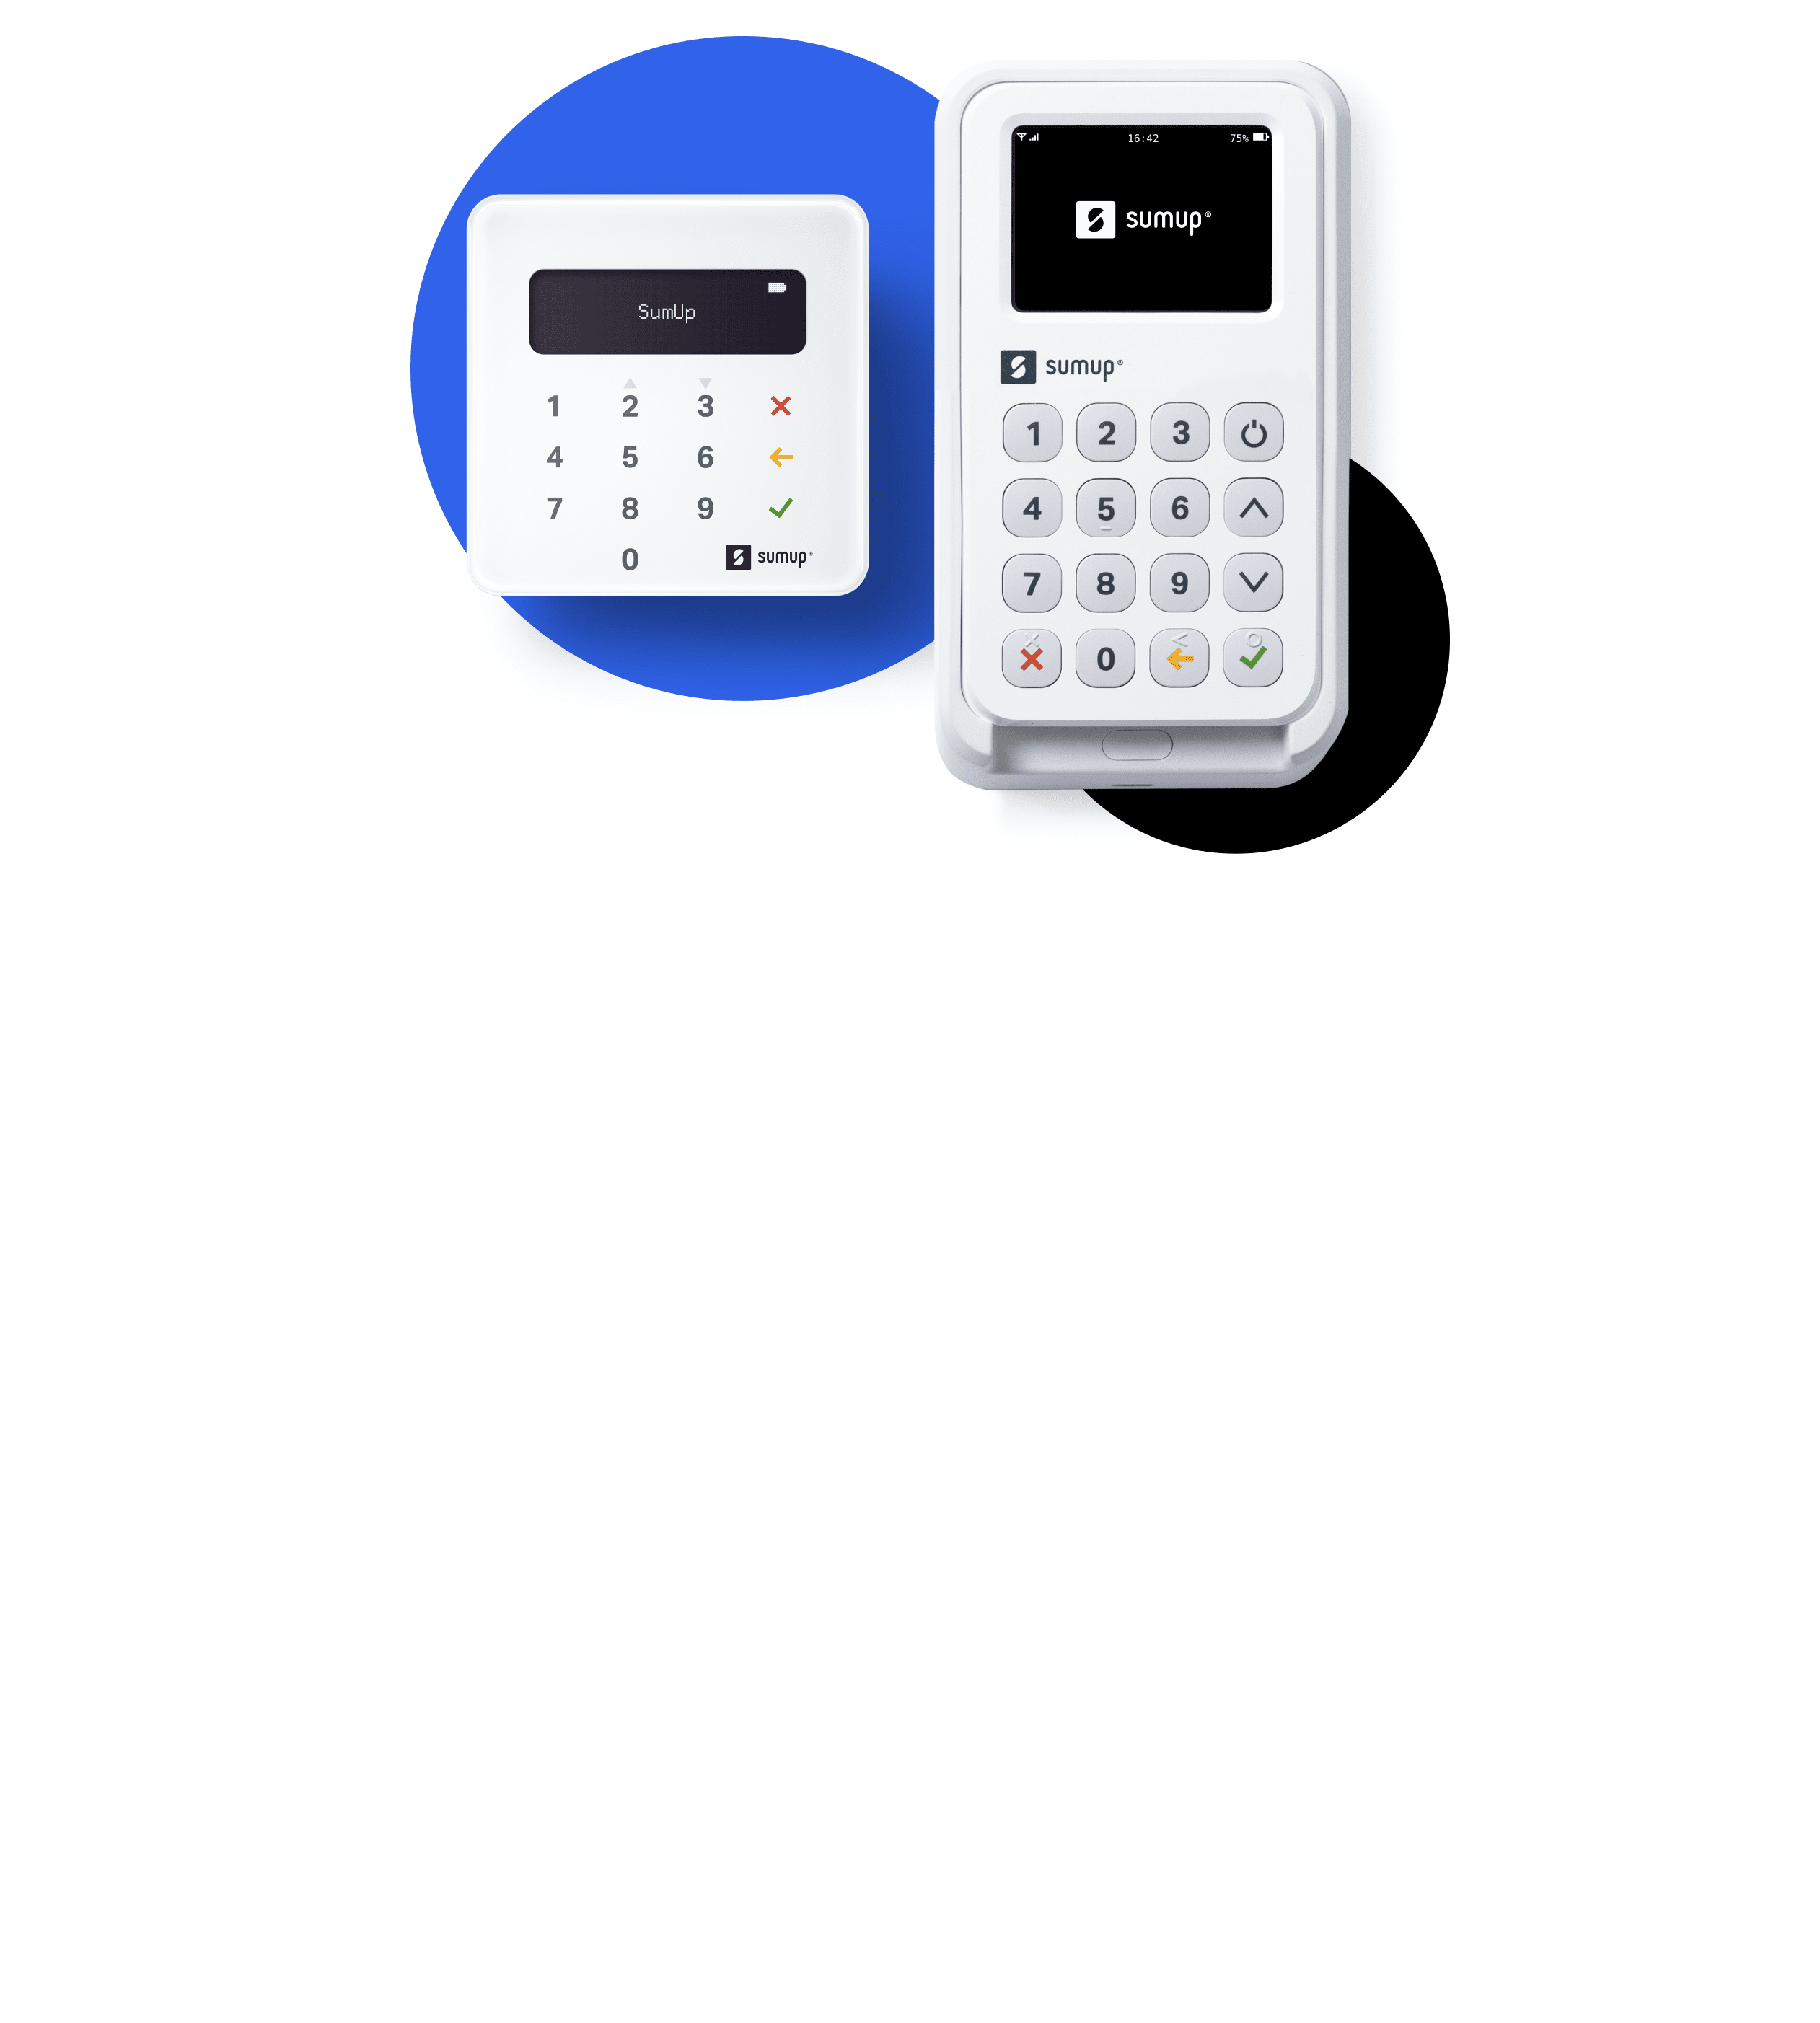 EMV Terminal - Mobile Credit Card Reader for Android and iPhone